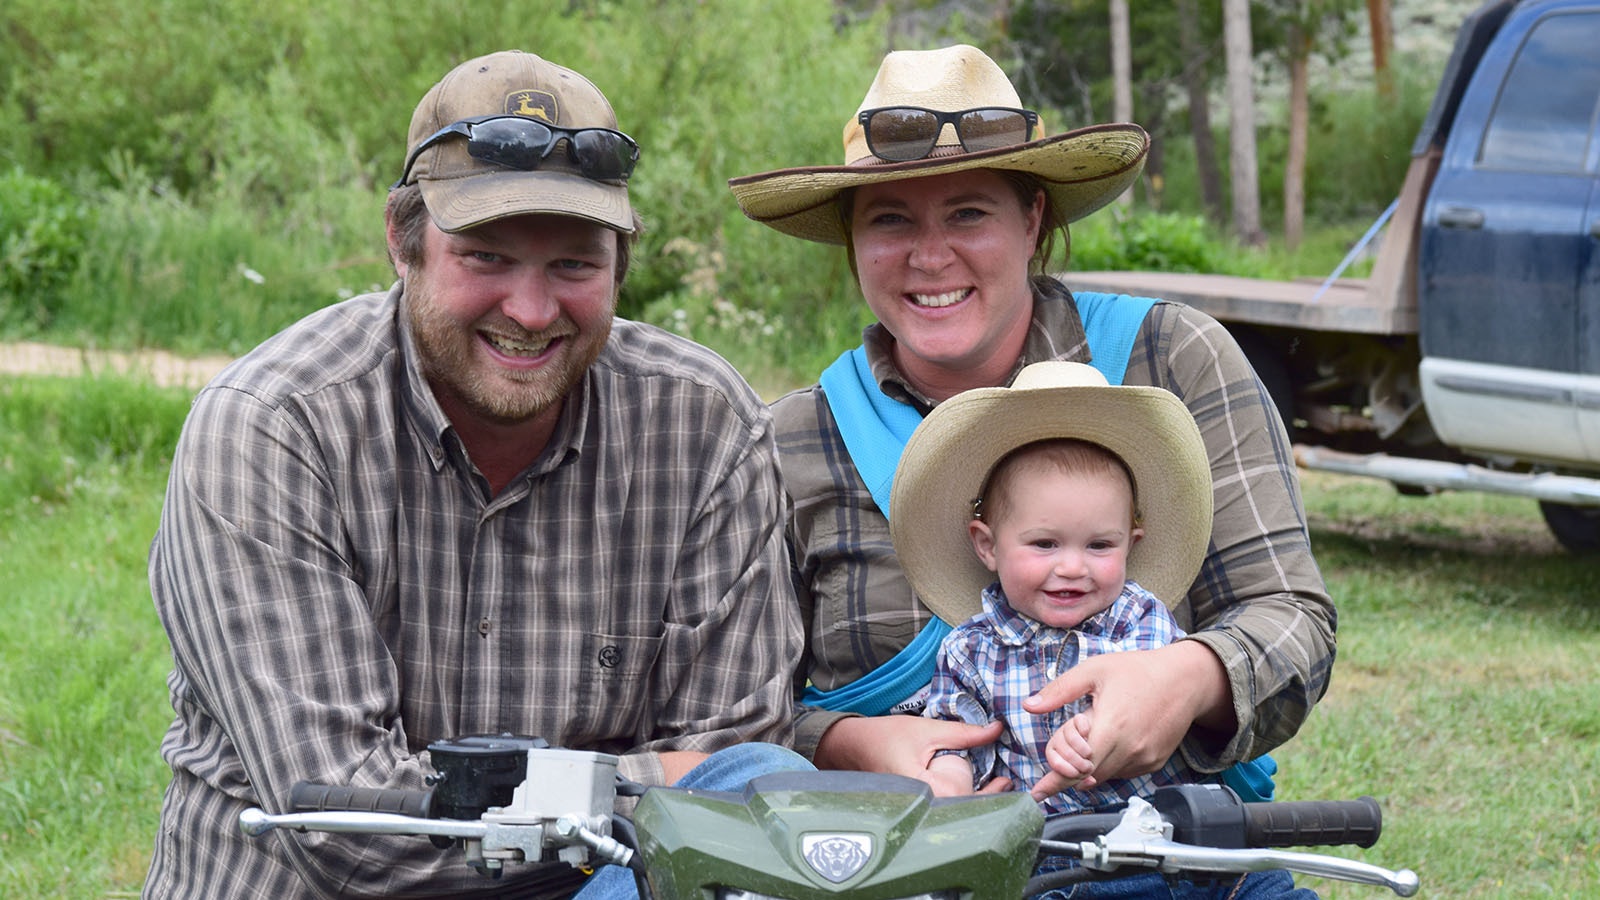 Albany County ranchers Tim and Leisl Carpenter, along with their son Casen, worry that they might not be able to get their cattle up to summer range along Boswell Road, because the road is closed. The couple also recently had a daughter, Kylie.